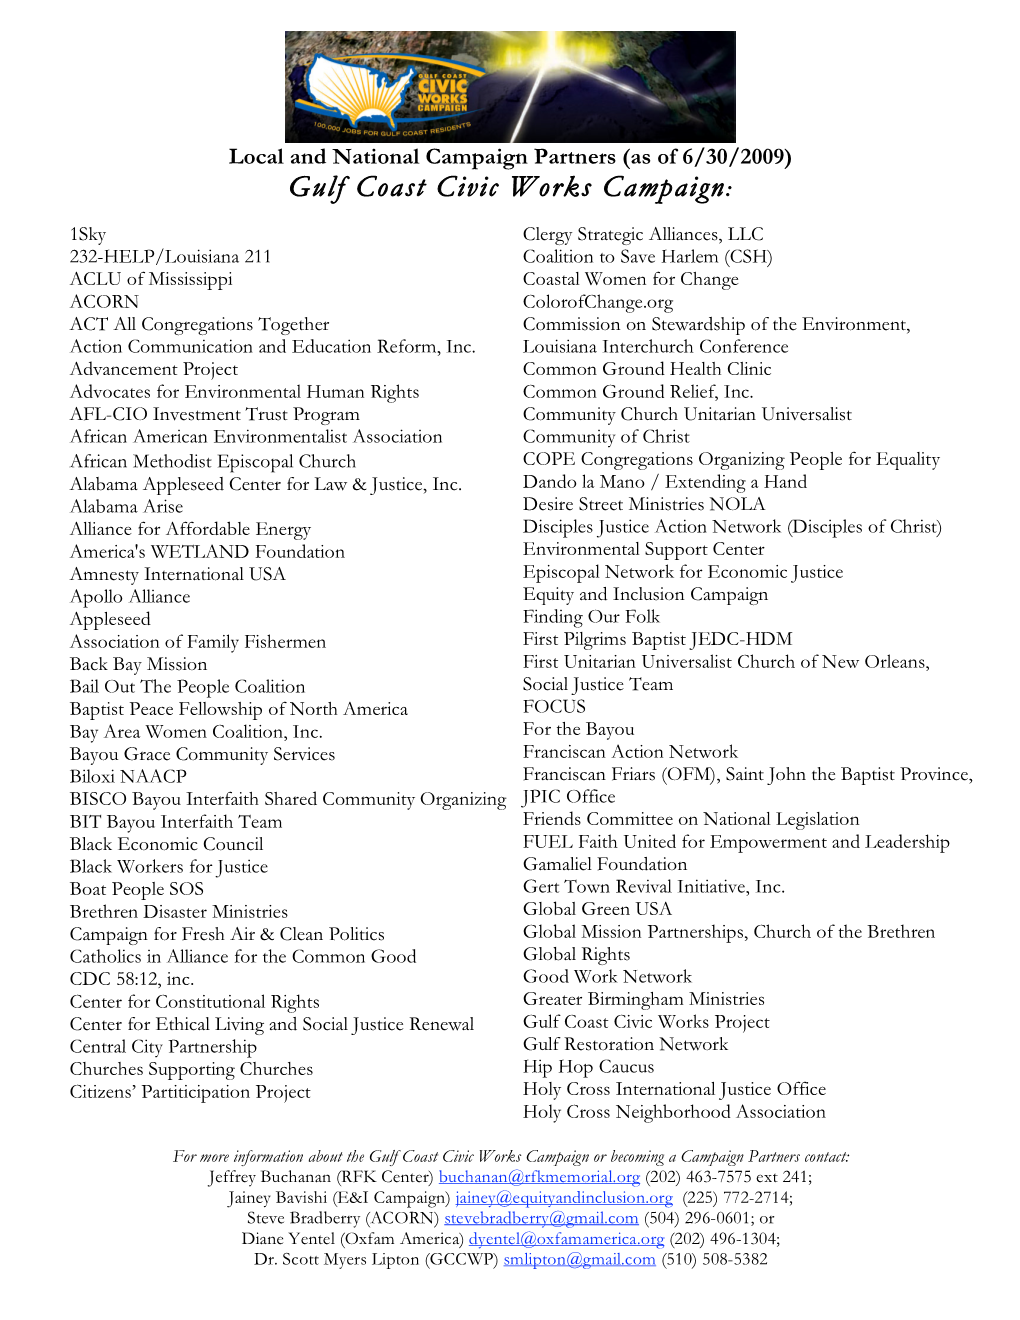 GCCW Campaign Partners